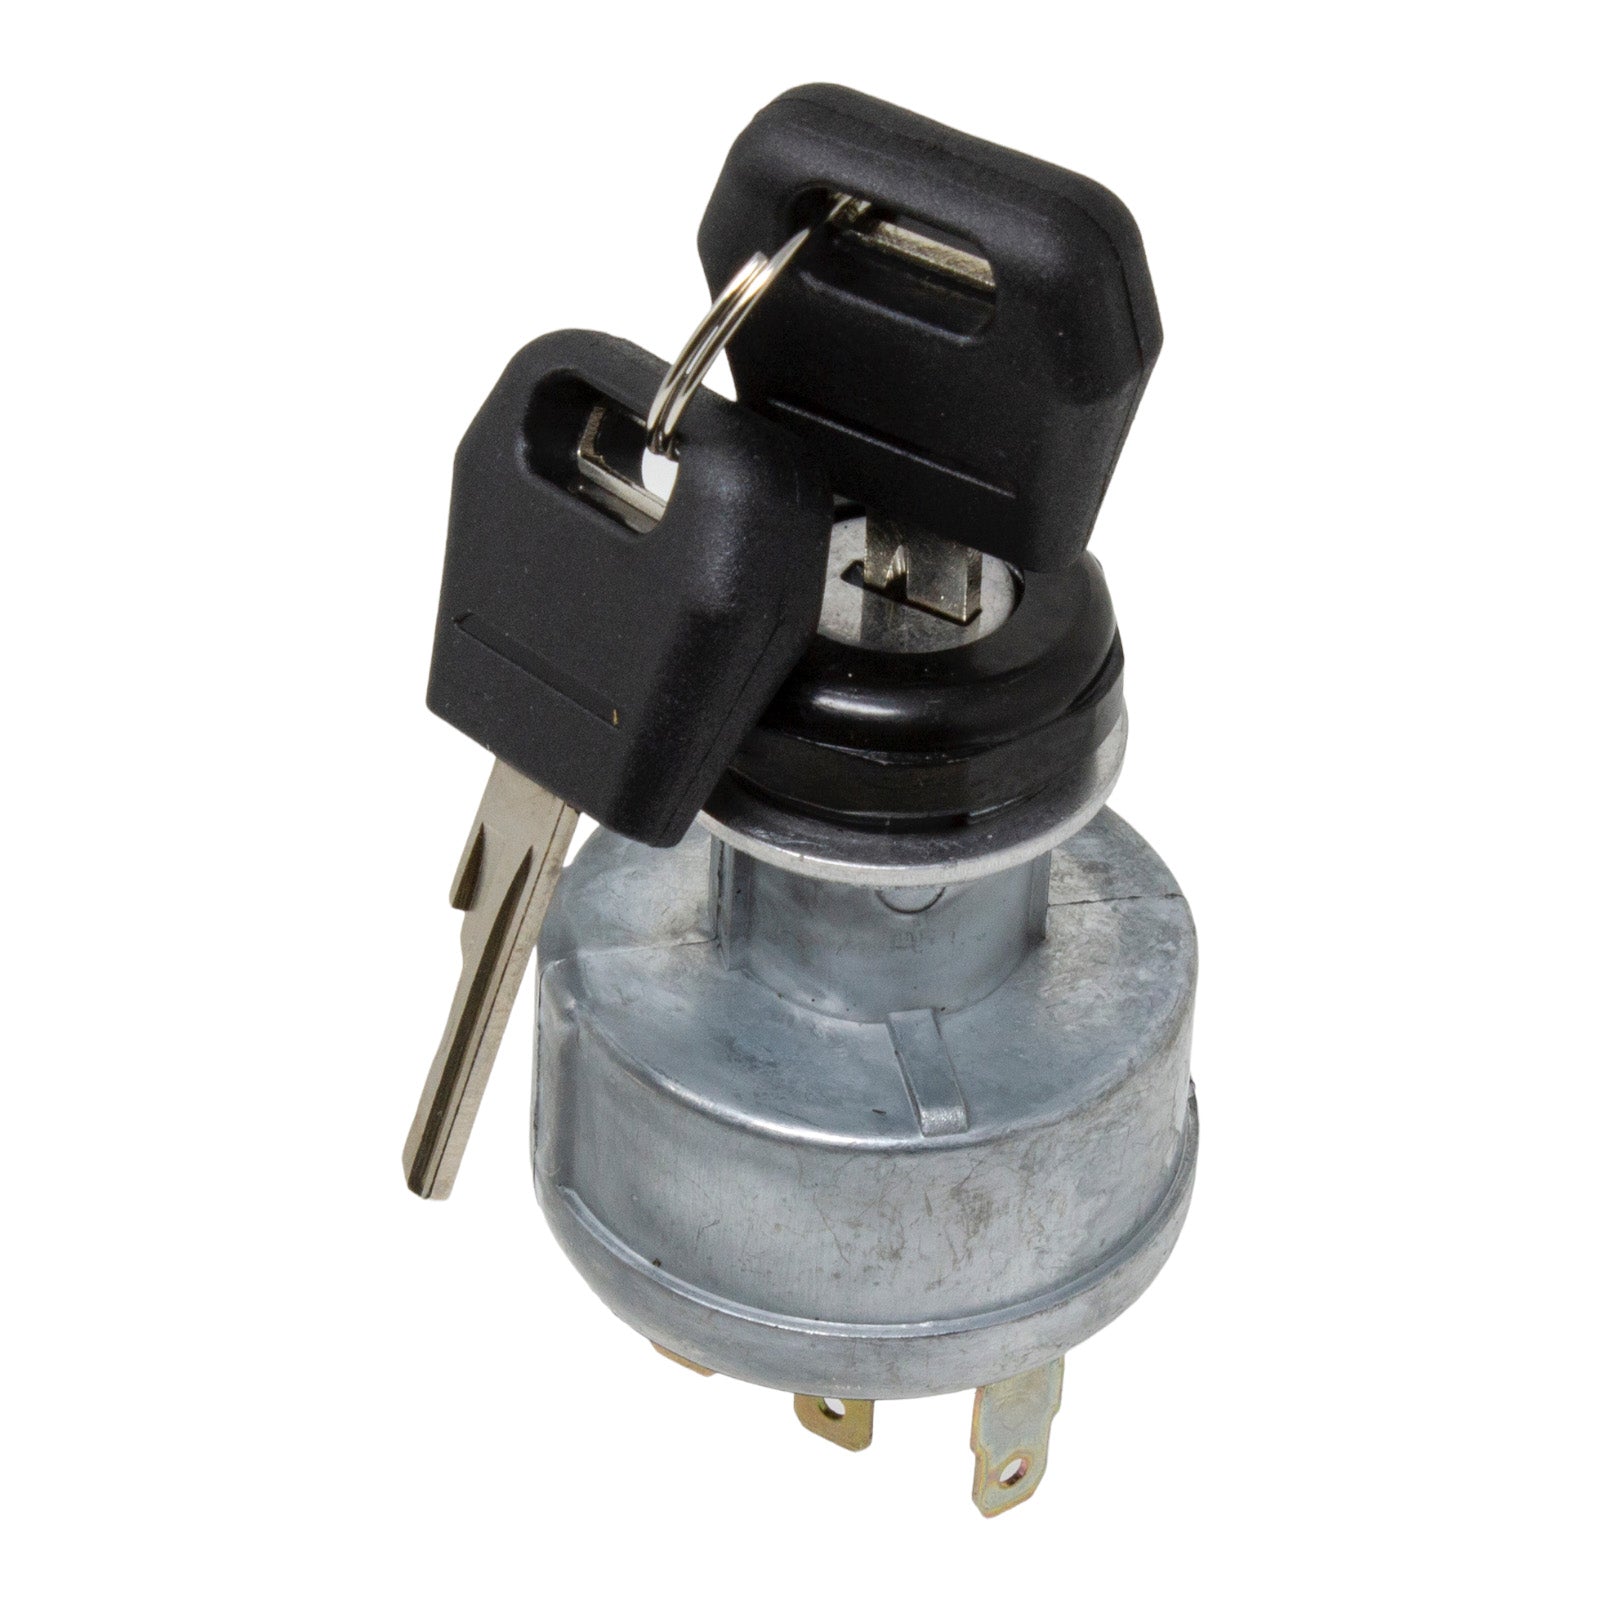 Duraforce L77723, Ignition Switch For Case IH